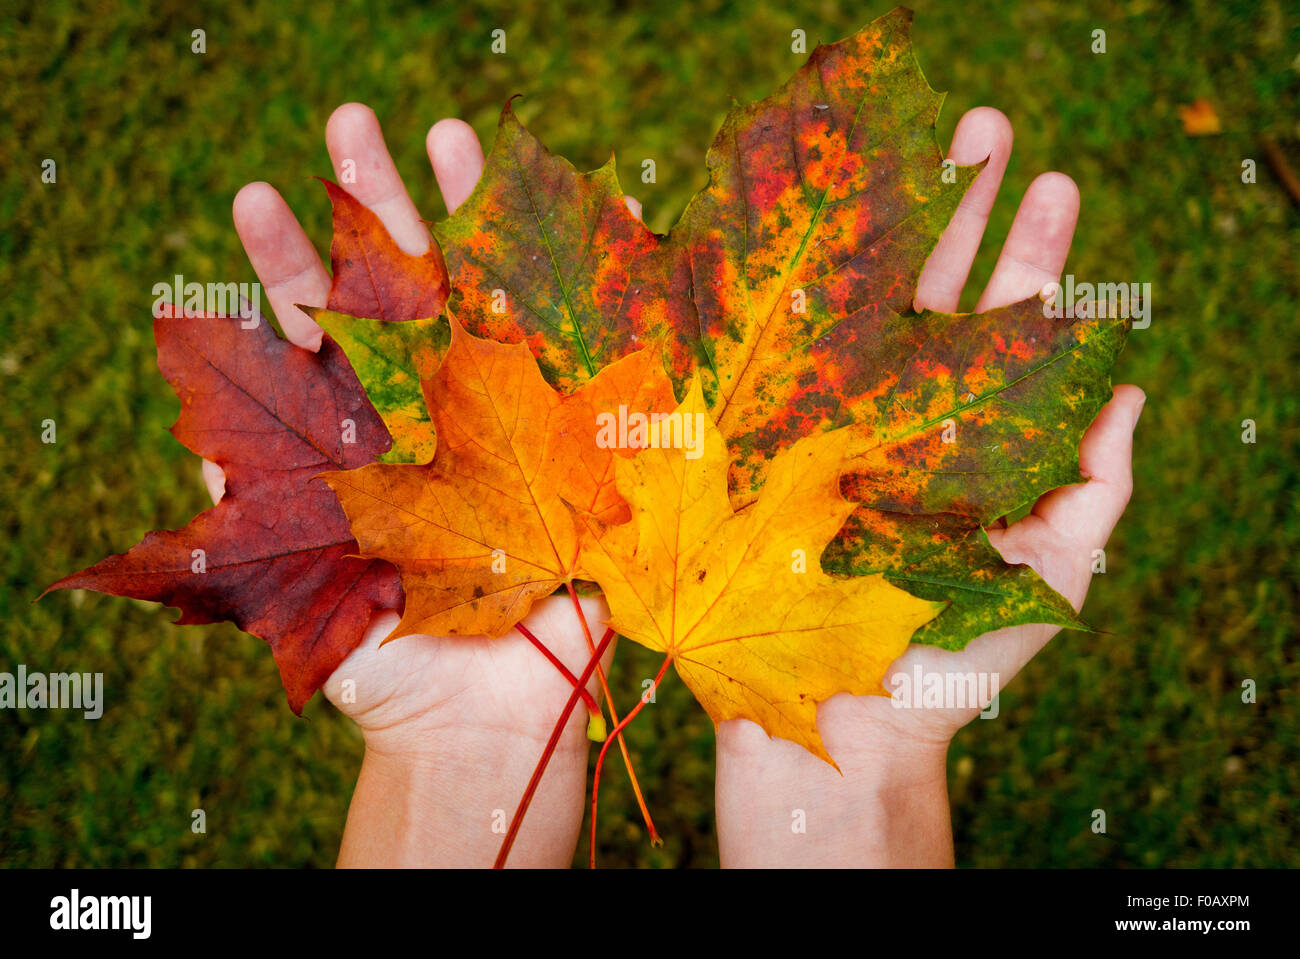 A pair of hands holding autumn leaves of different colours Stock Photo